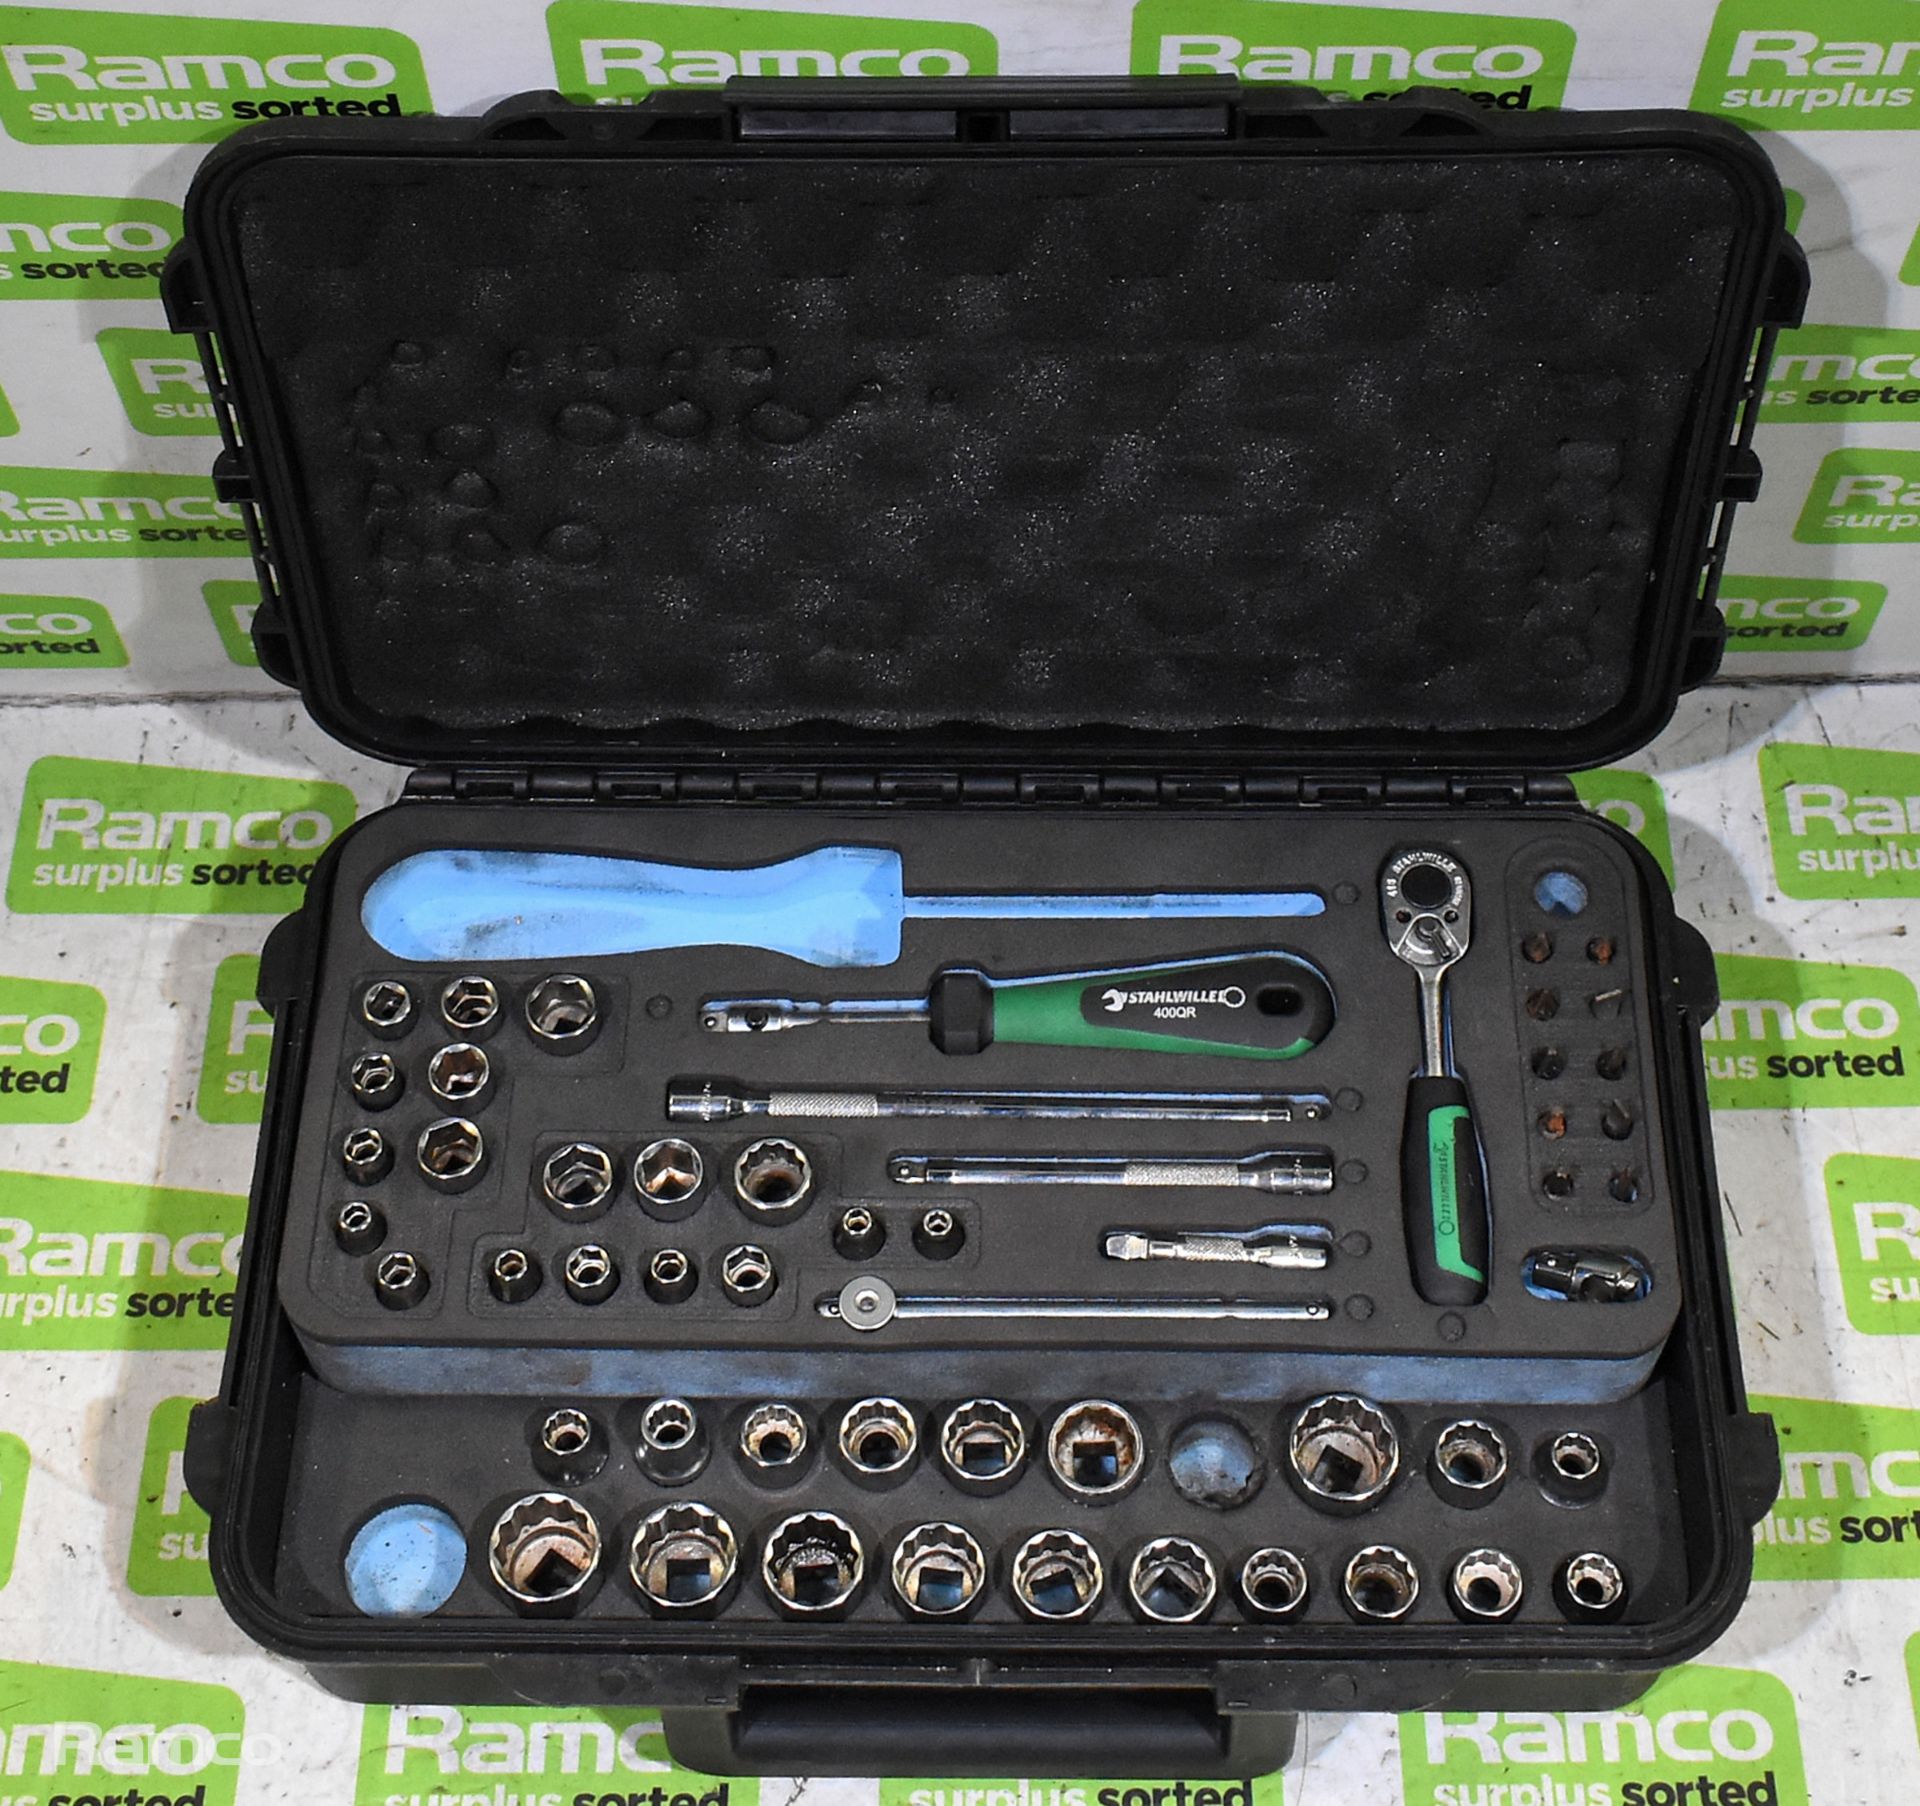 Multi piece socket set in plastic case with foam inserts - Snap-on 1/4 and 3/8 inch sockets - Image 3 of 12